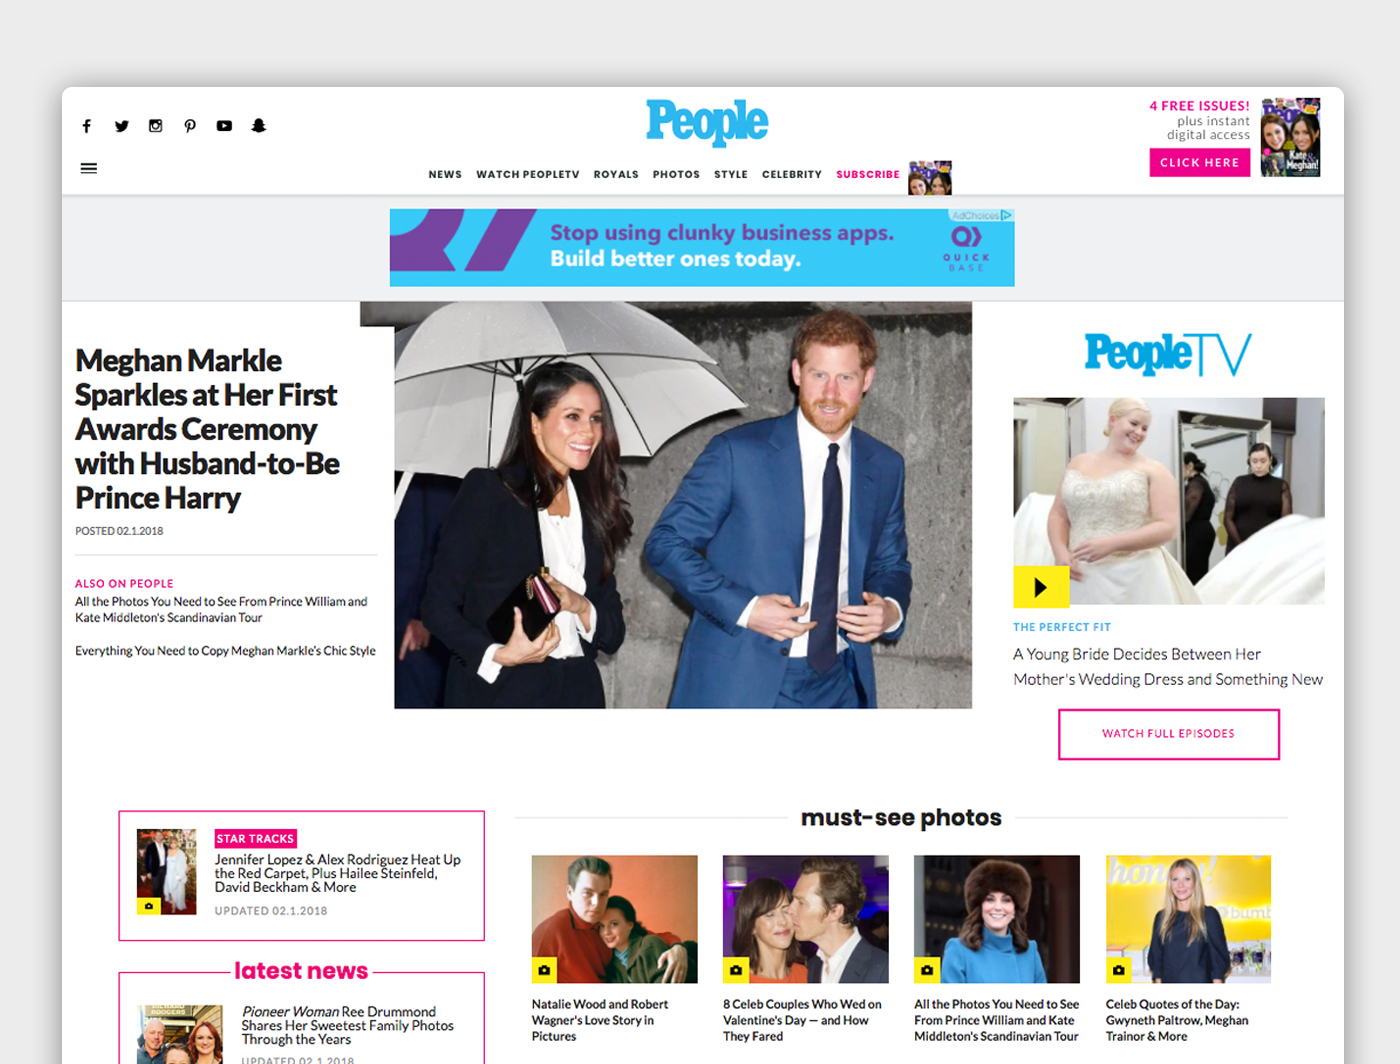 The People front page with navigation, a featured article, and various other features such as PeopleTV, must-see photos, and latest news